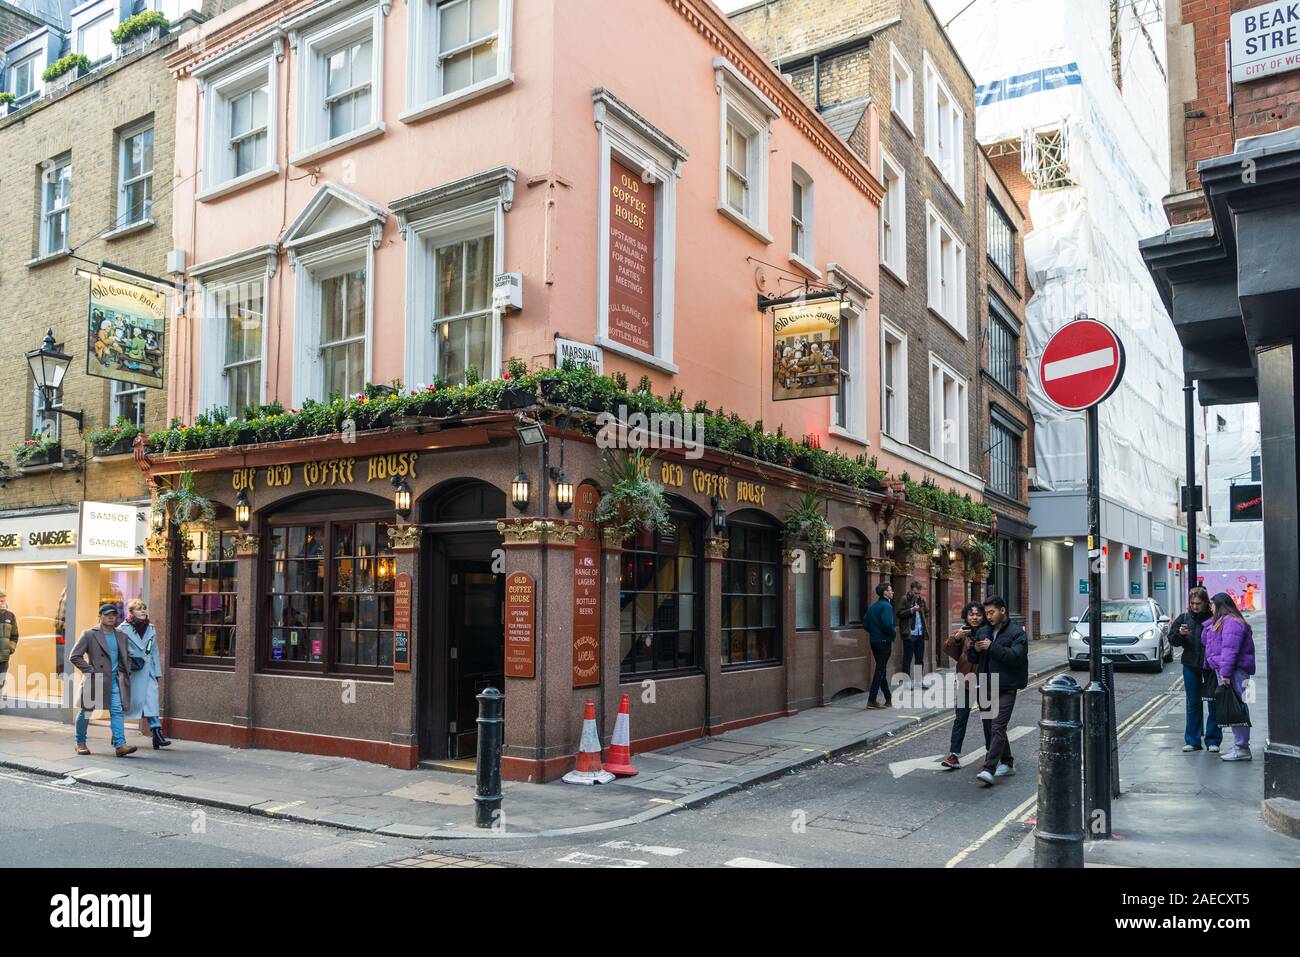 People out and about outside the Old Coffee House pub and restaurant in Beak  Street, Soho, London, England, UK Stock Photo - Alamy